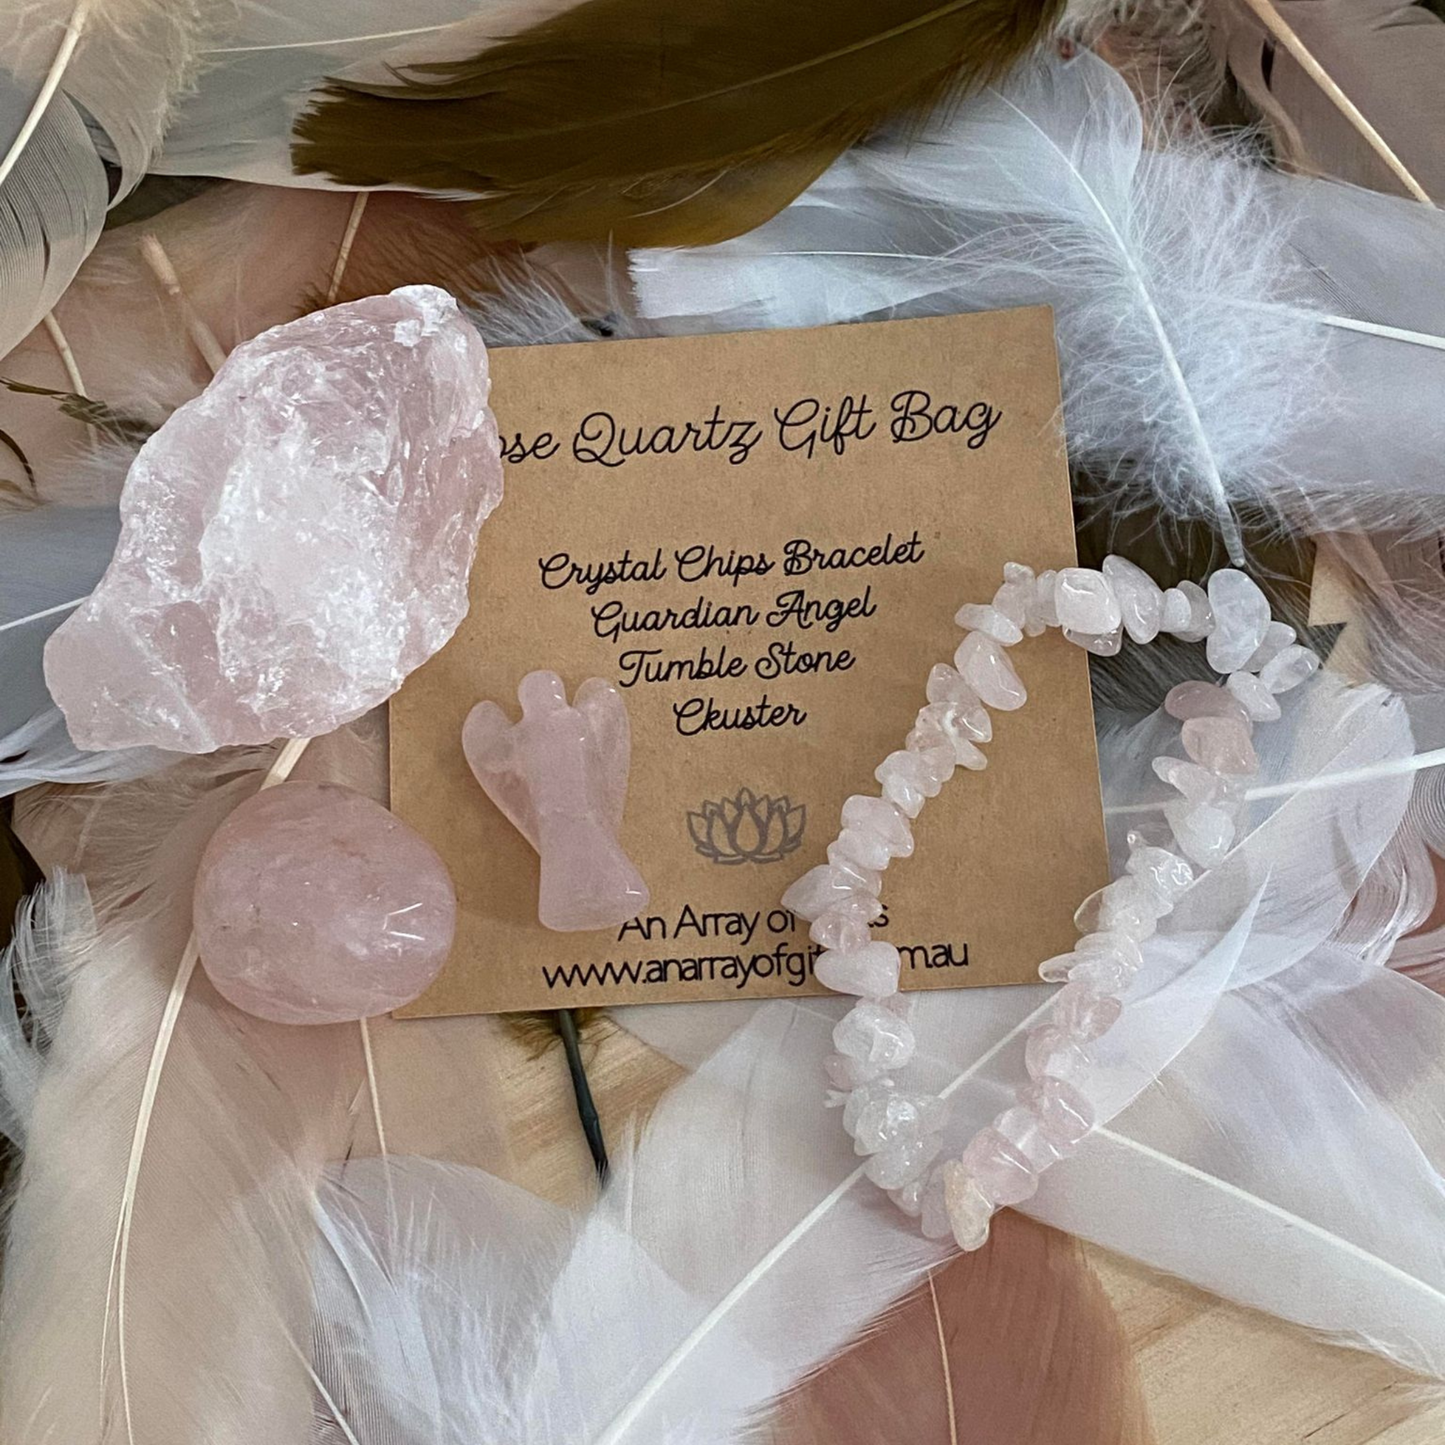 Rose Quartz Gift Bag with Crystal Chip Bracelet,Guardian Angel, Tumble Stone and Cluster.